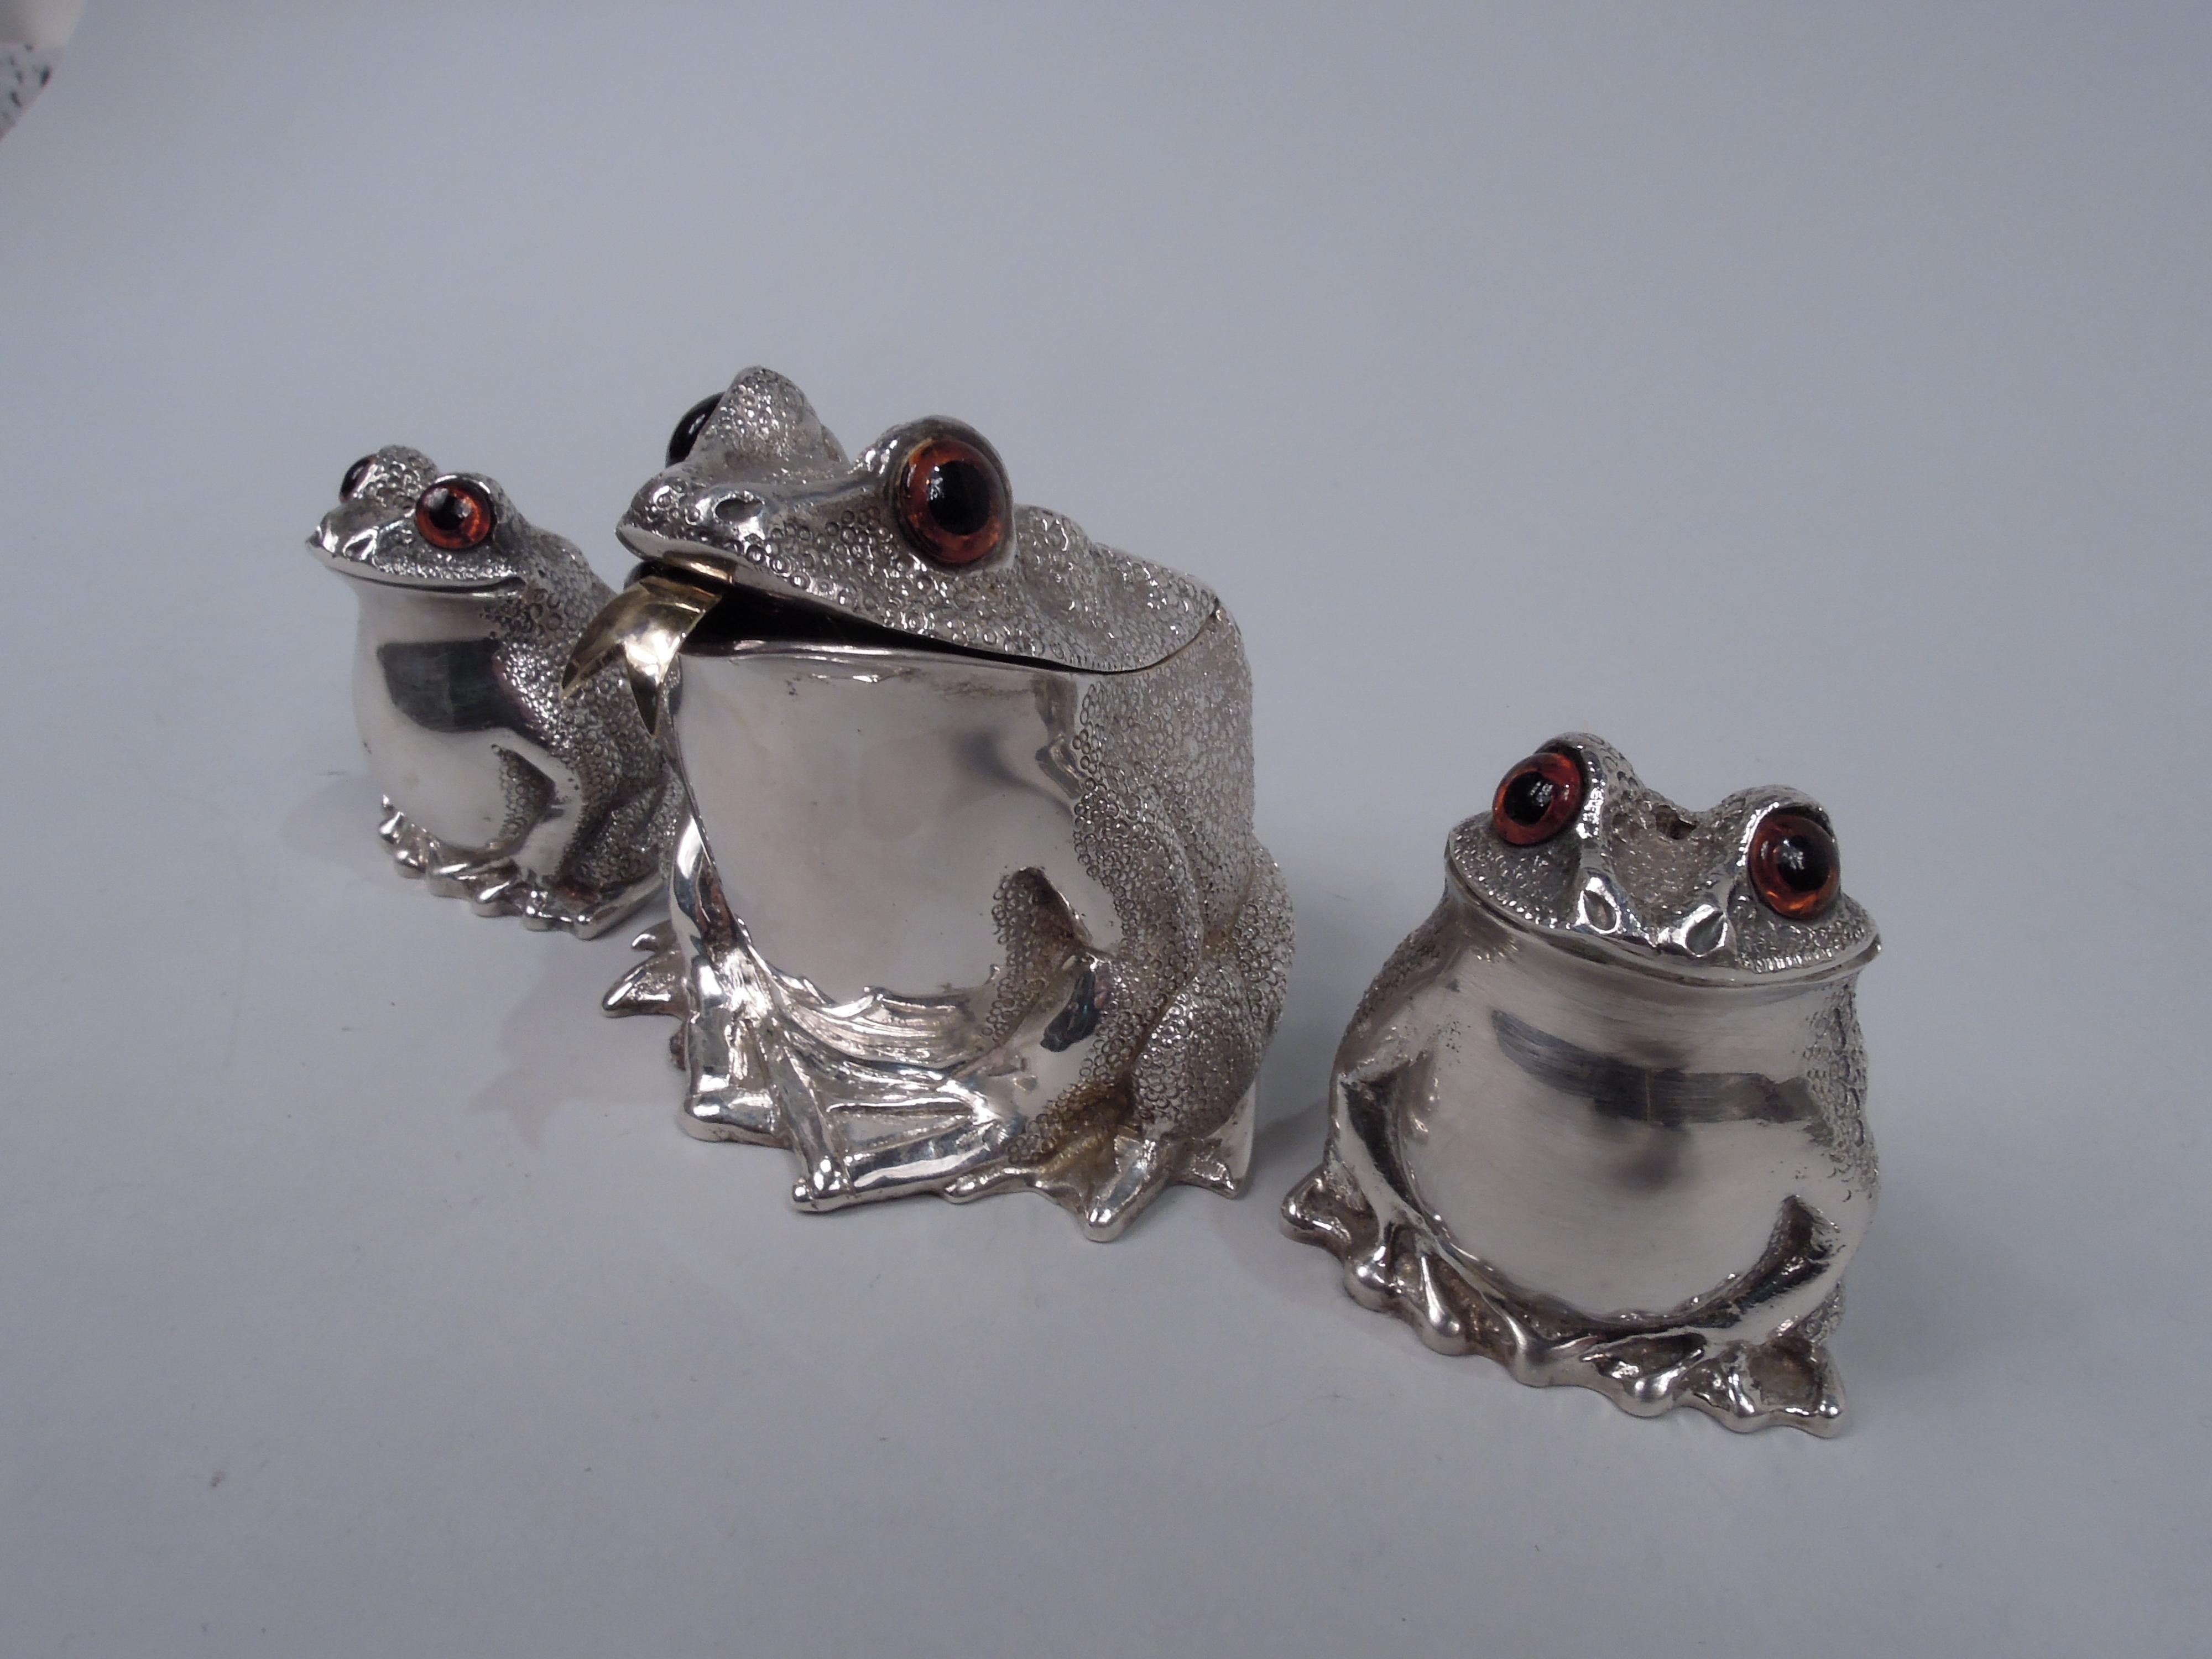 Elizabeth II sterling silver figural cast condiment set. Made by Richard Comyns in London in 1980. This set comprises mustard pot and salt and pepper shakers.
Each: A squatting, smirking frog with glass exophthalmic eyes and scaly back and